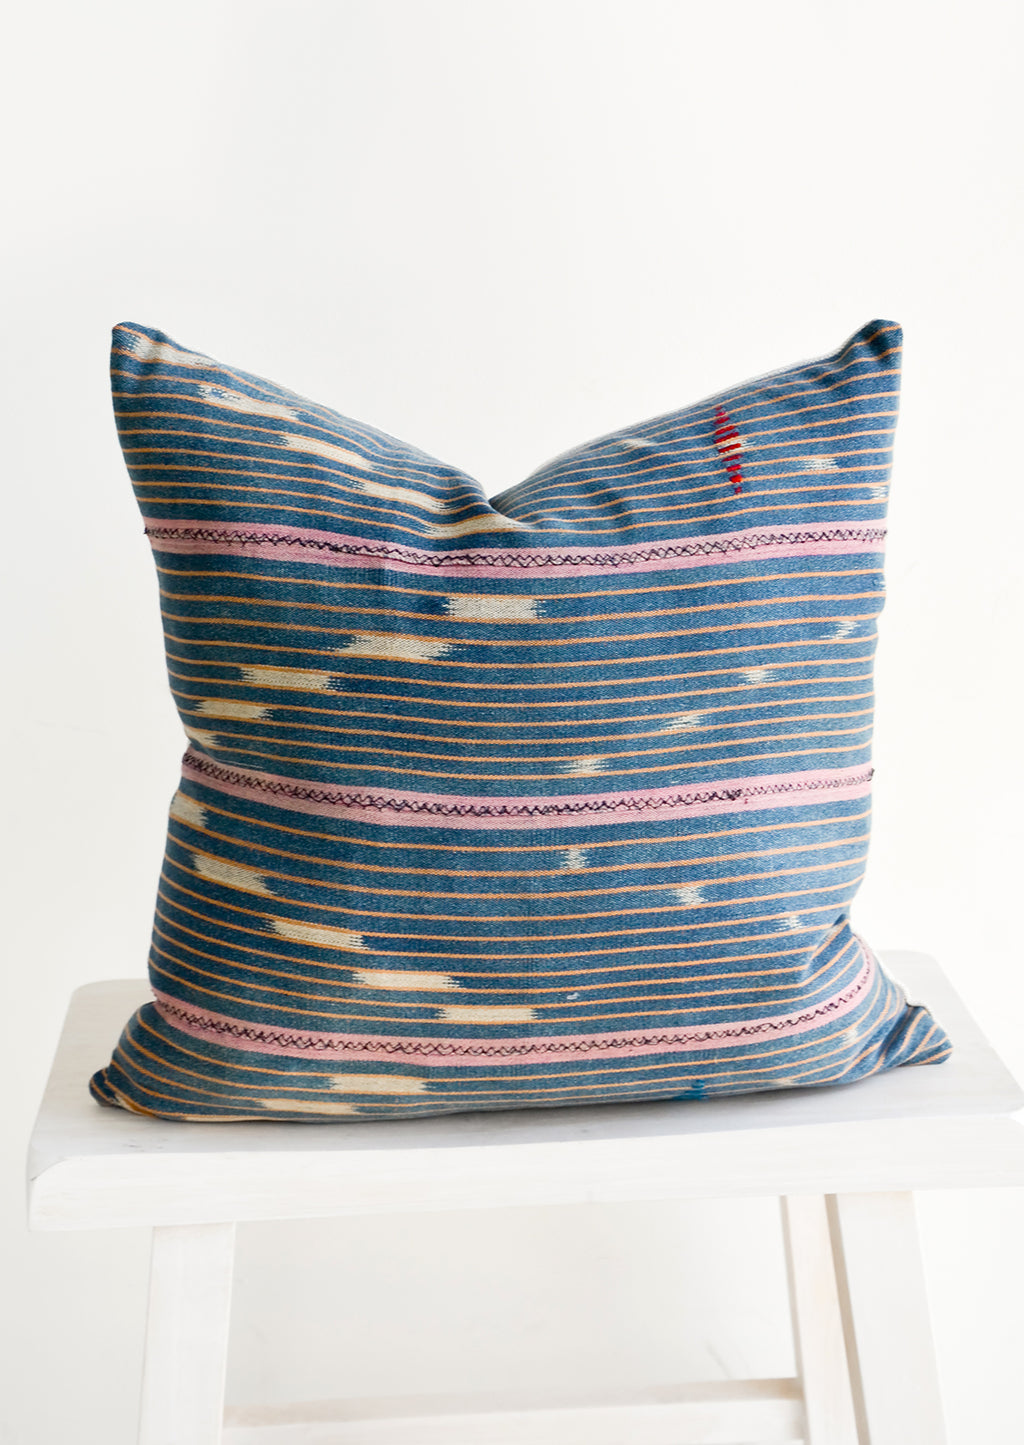 3: Throw pillow made from vintage indigo Baule fabric with peach and pink stripes